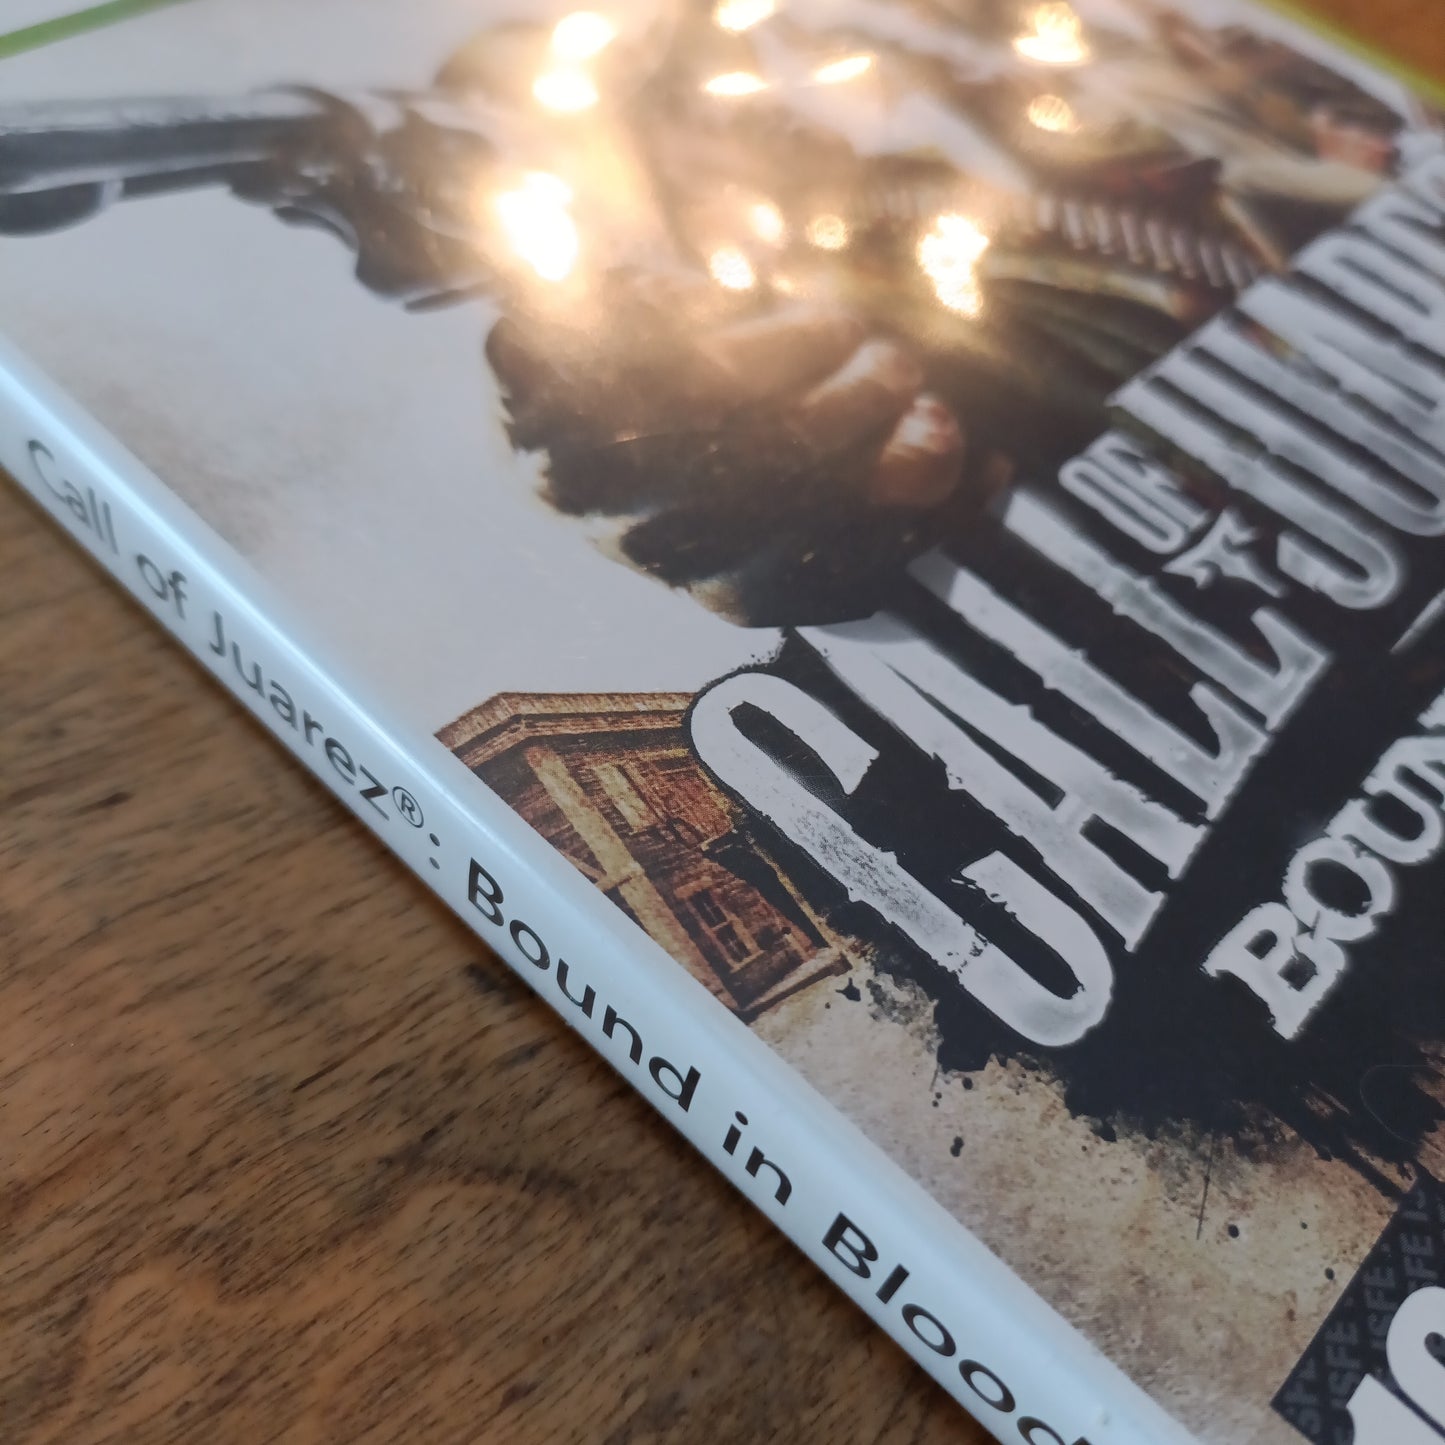 Call of Juarez - Round in Blood - Xbox 360